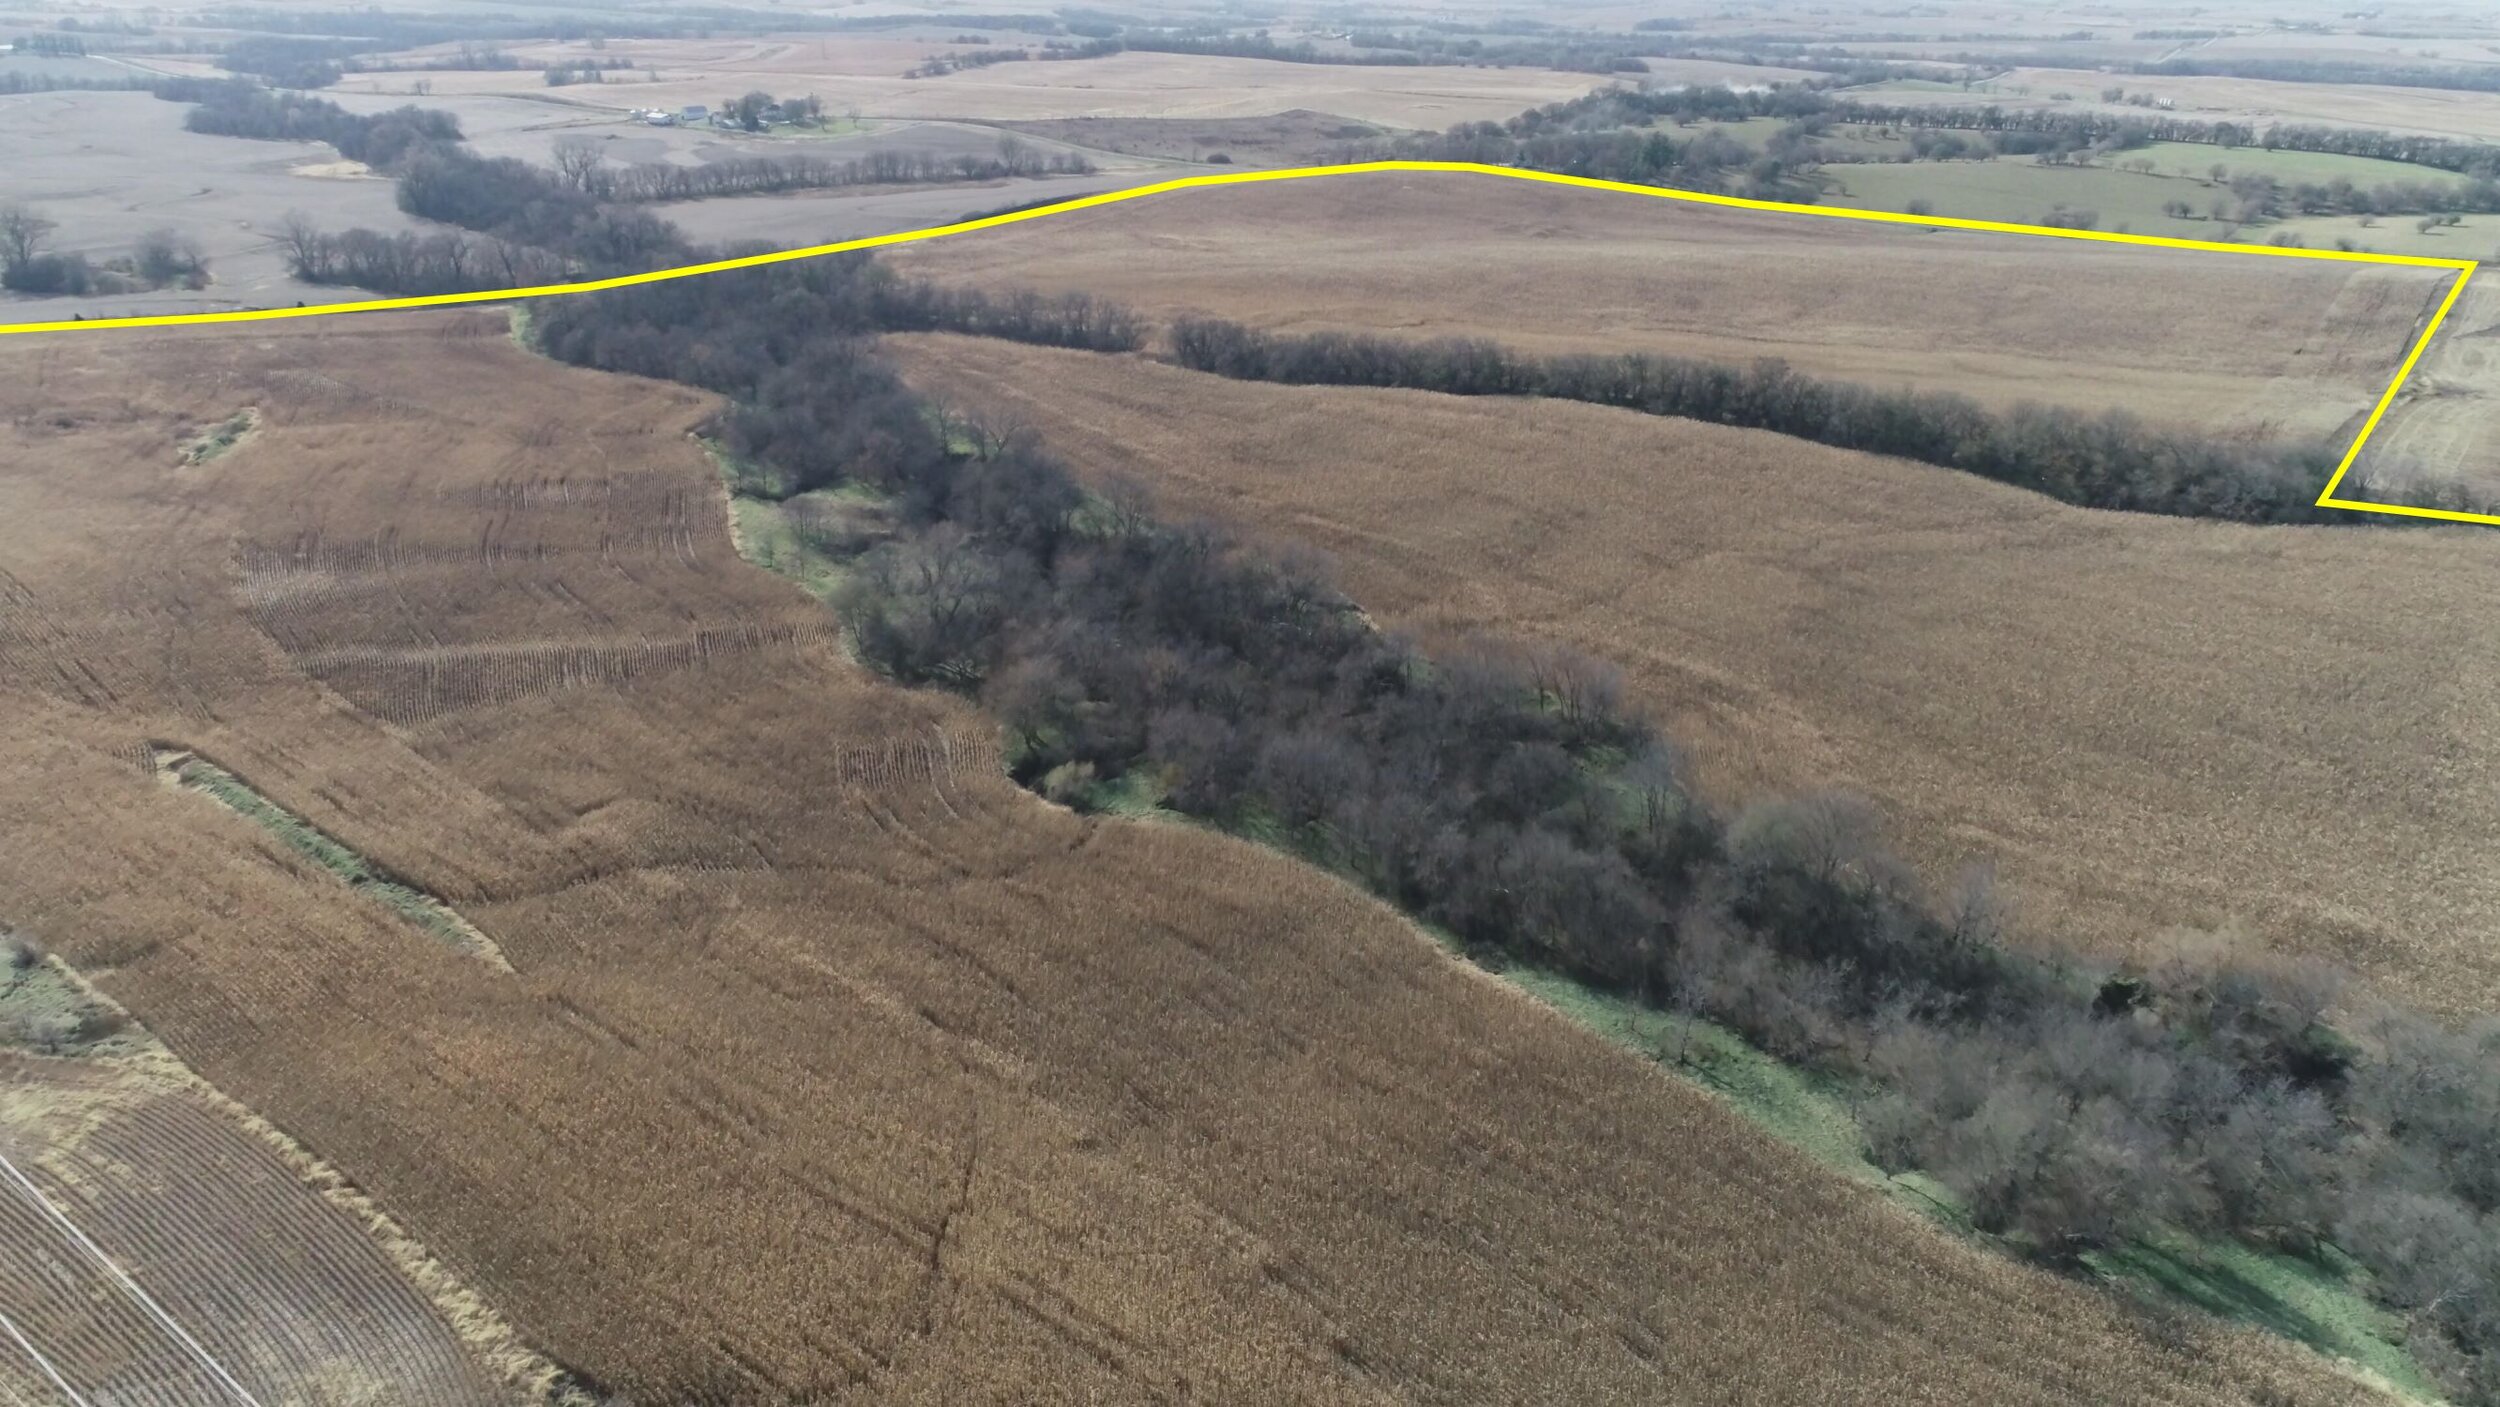 Looking Southwest at West Tract Corn (November 9, 2019)